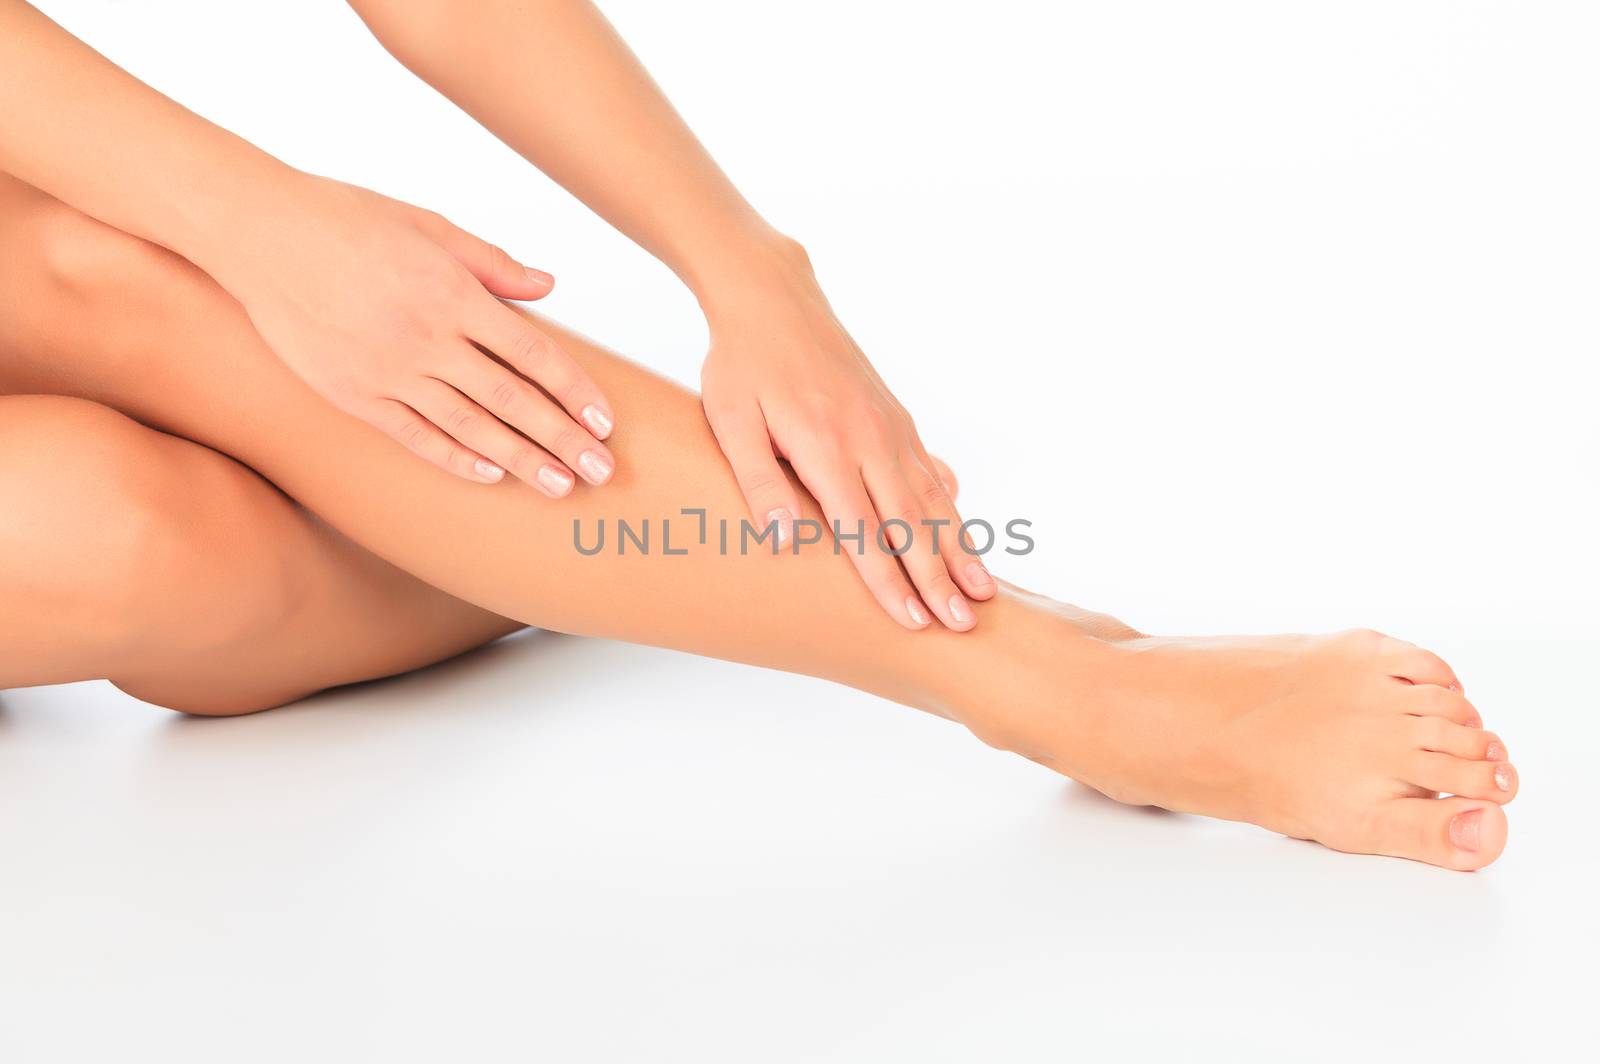 Woman touches her leg, white background, copyspace. by Nobilior